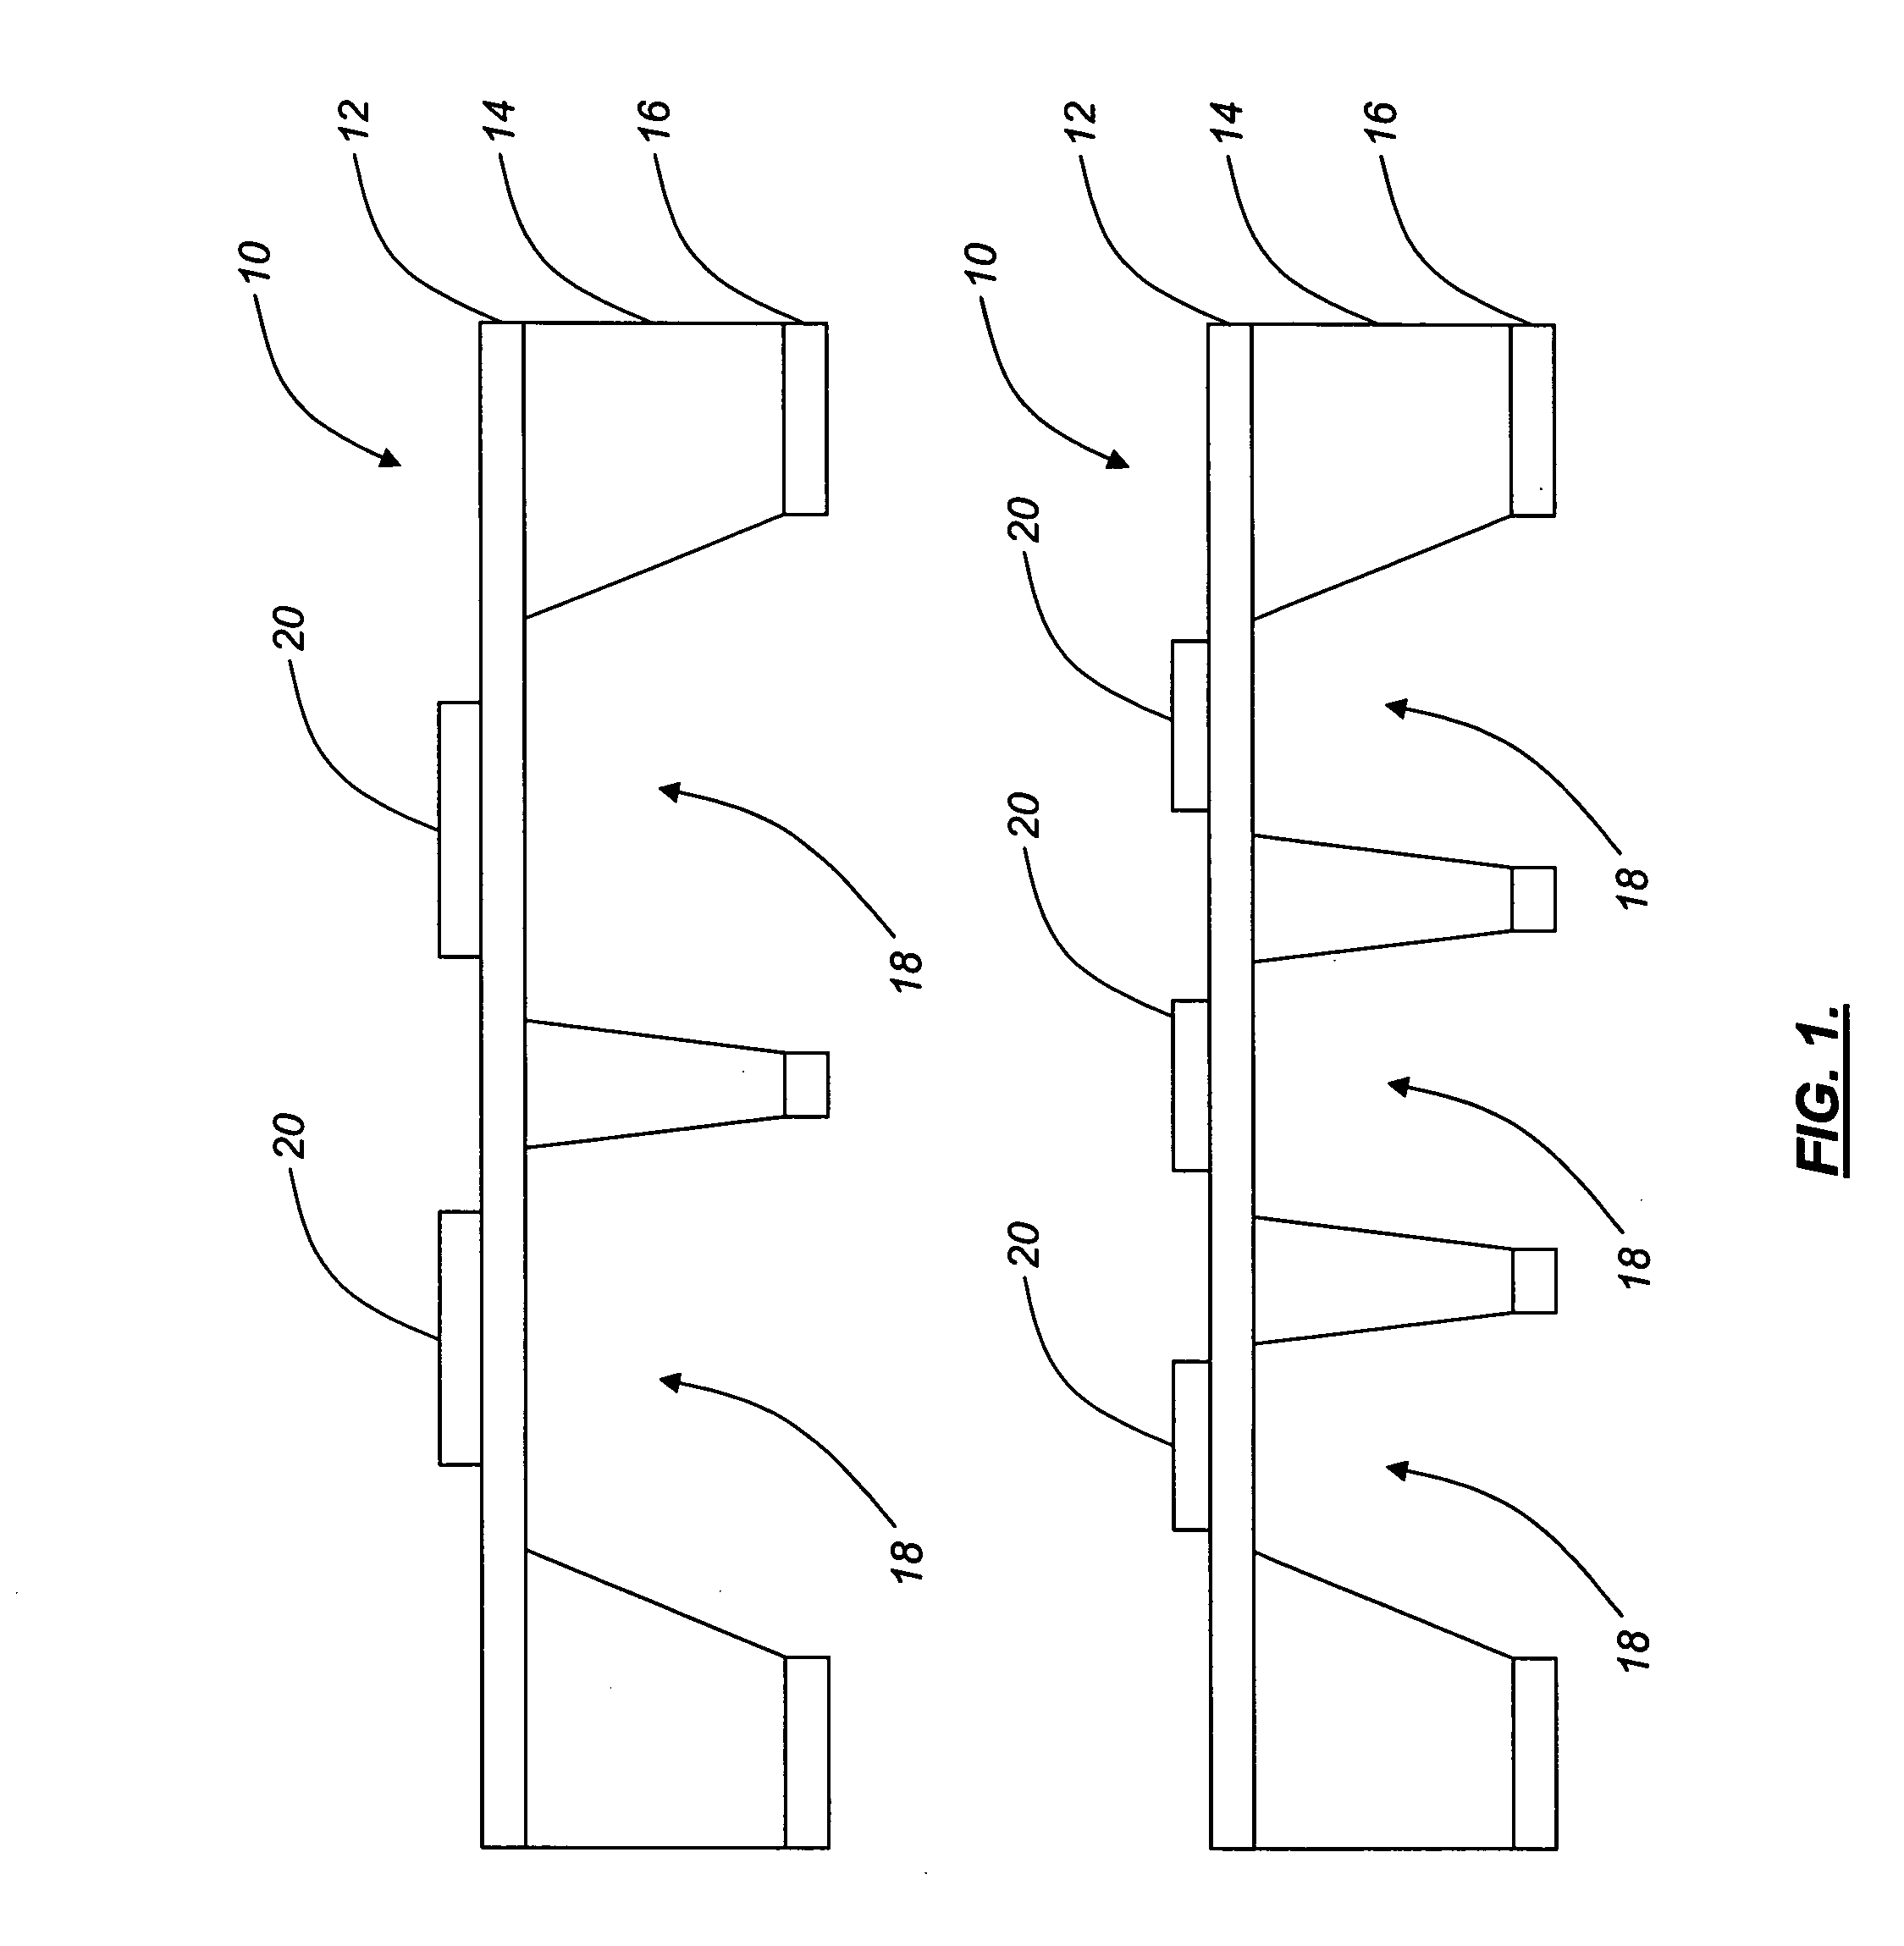 Miniaturized multi-gas and vapor sensor devices and associated methods of fabrication